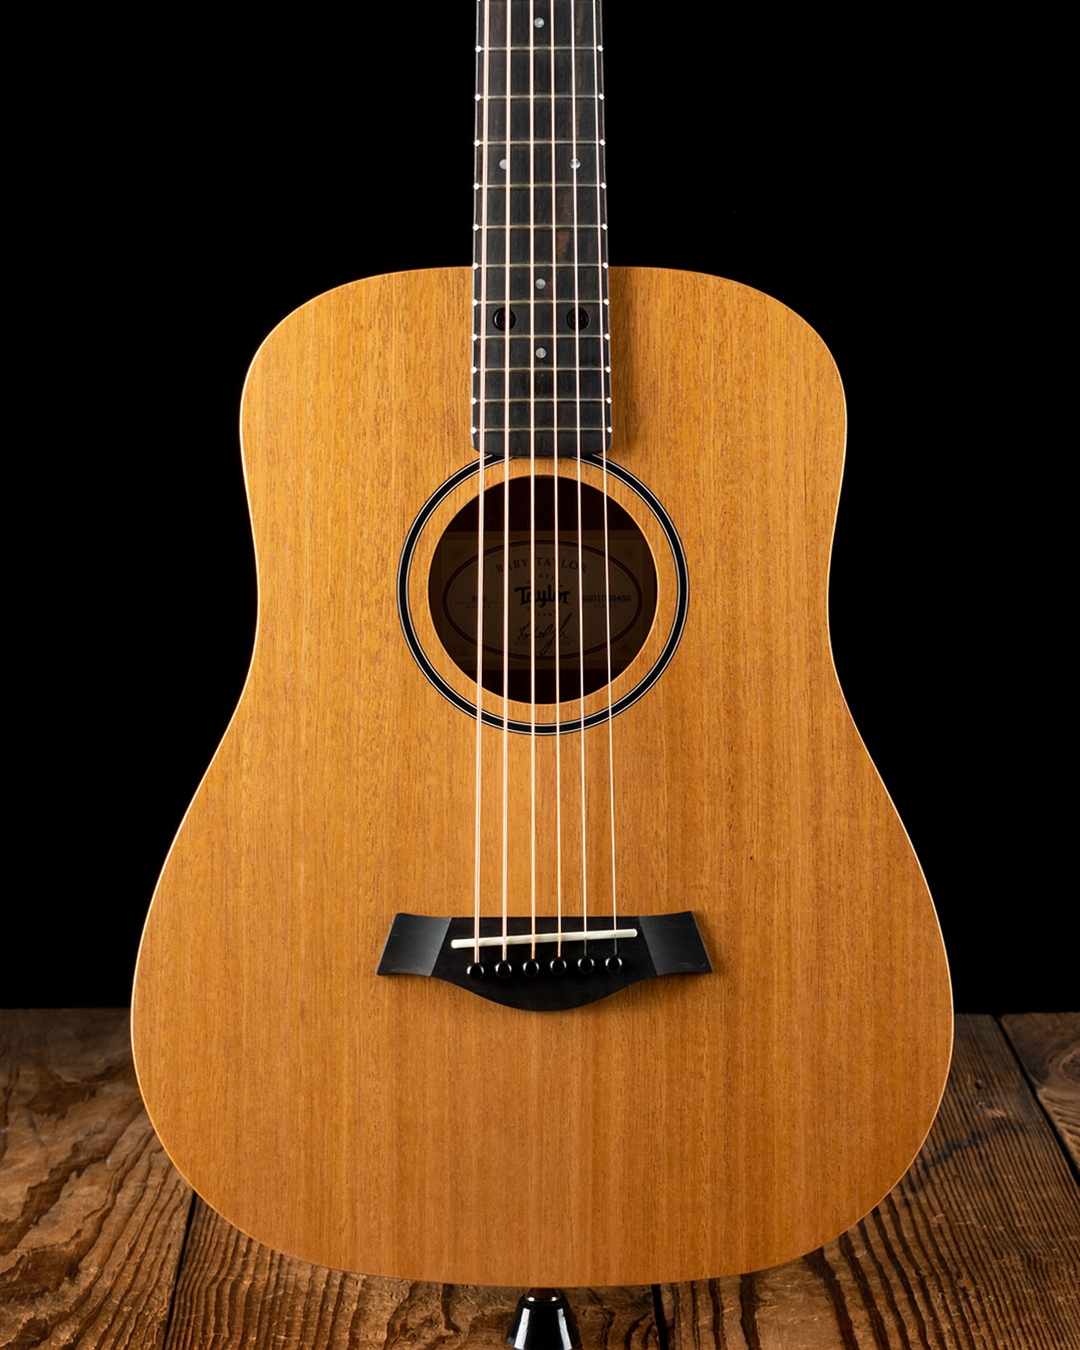 Taylor Taylor Baby Taylor Acoustic Guitar